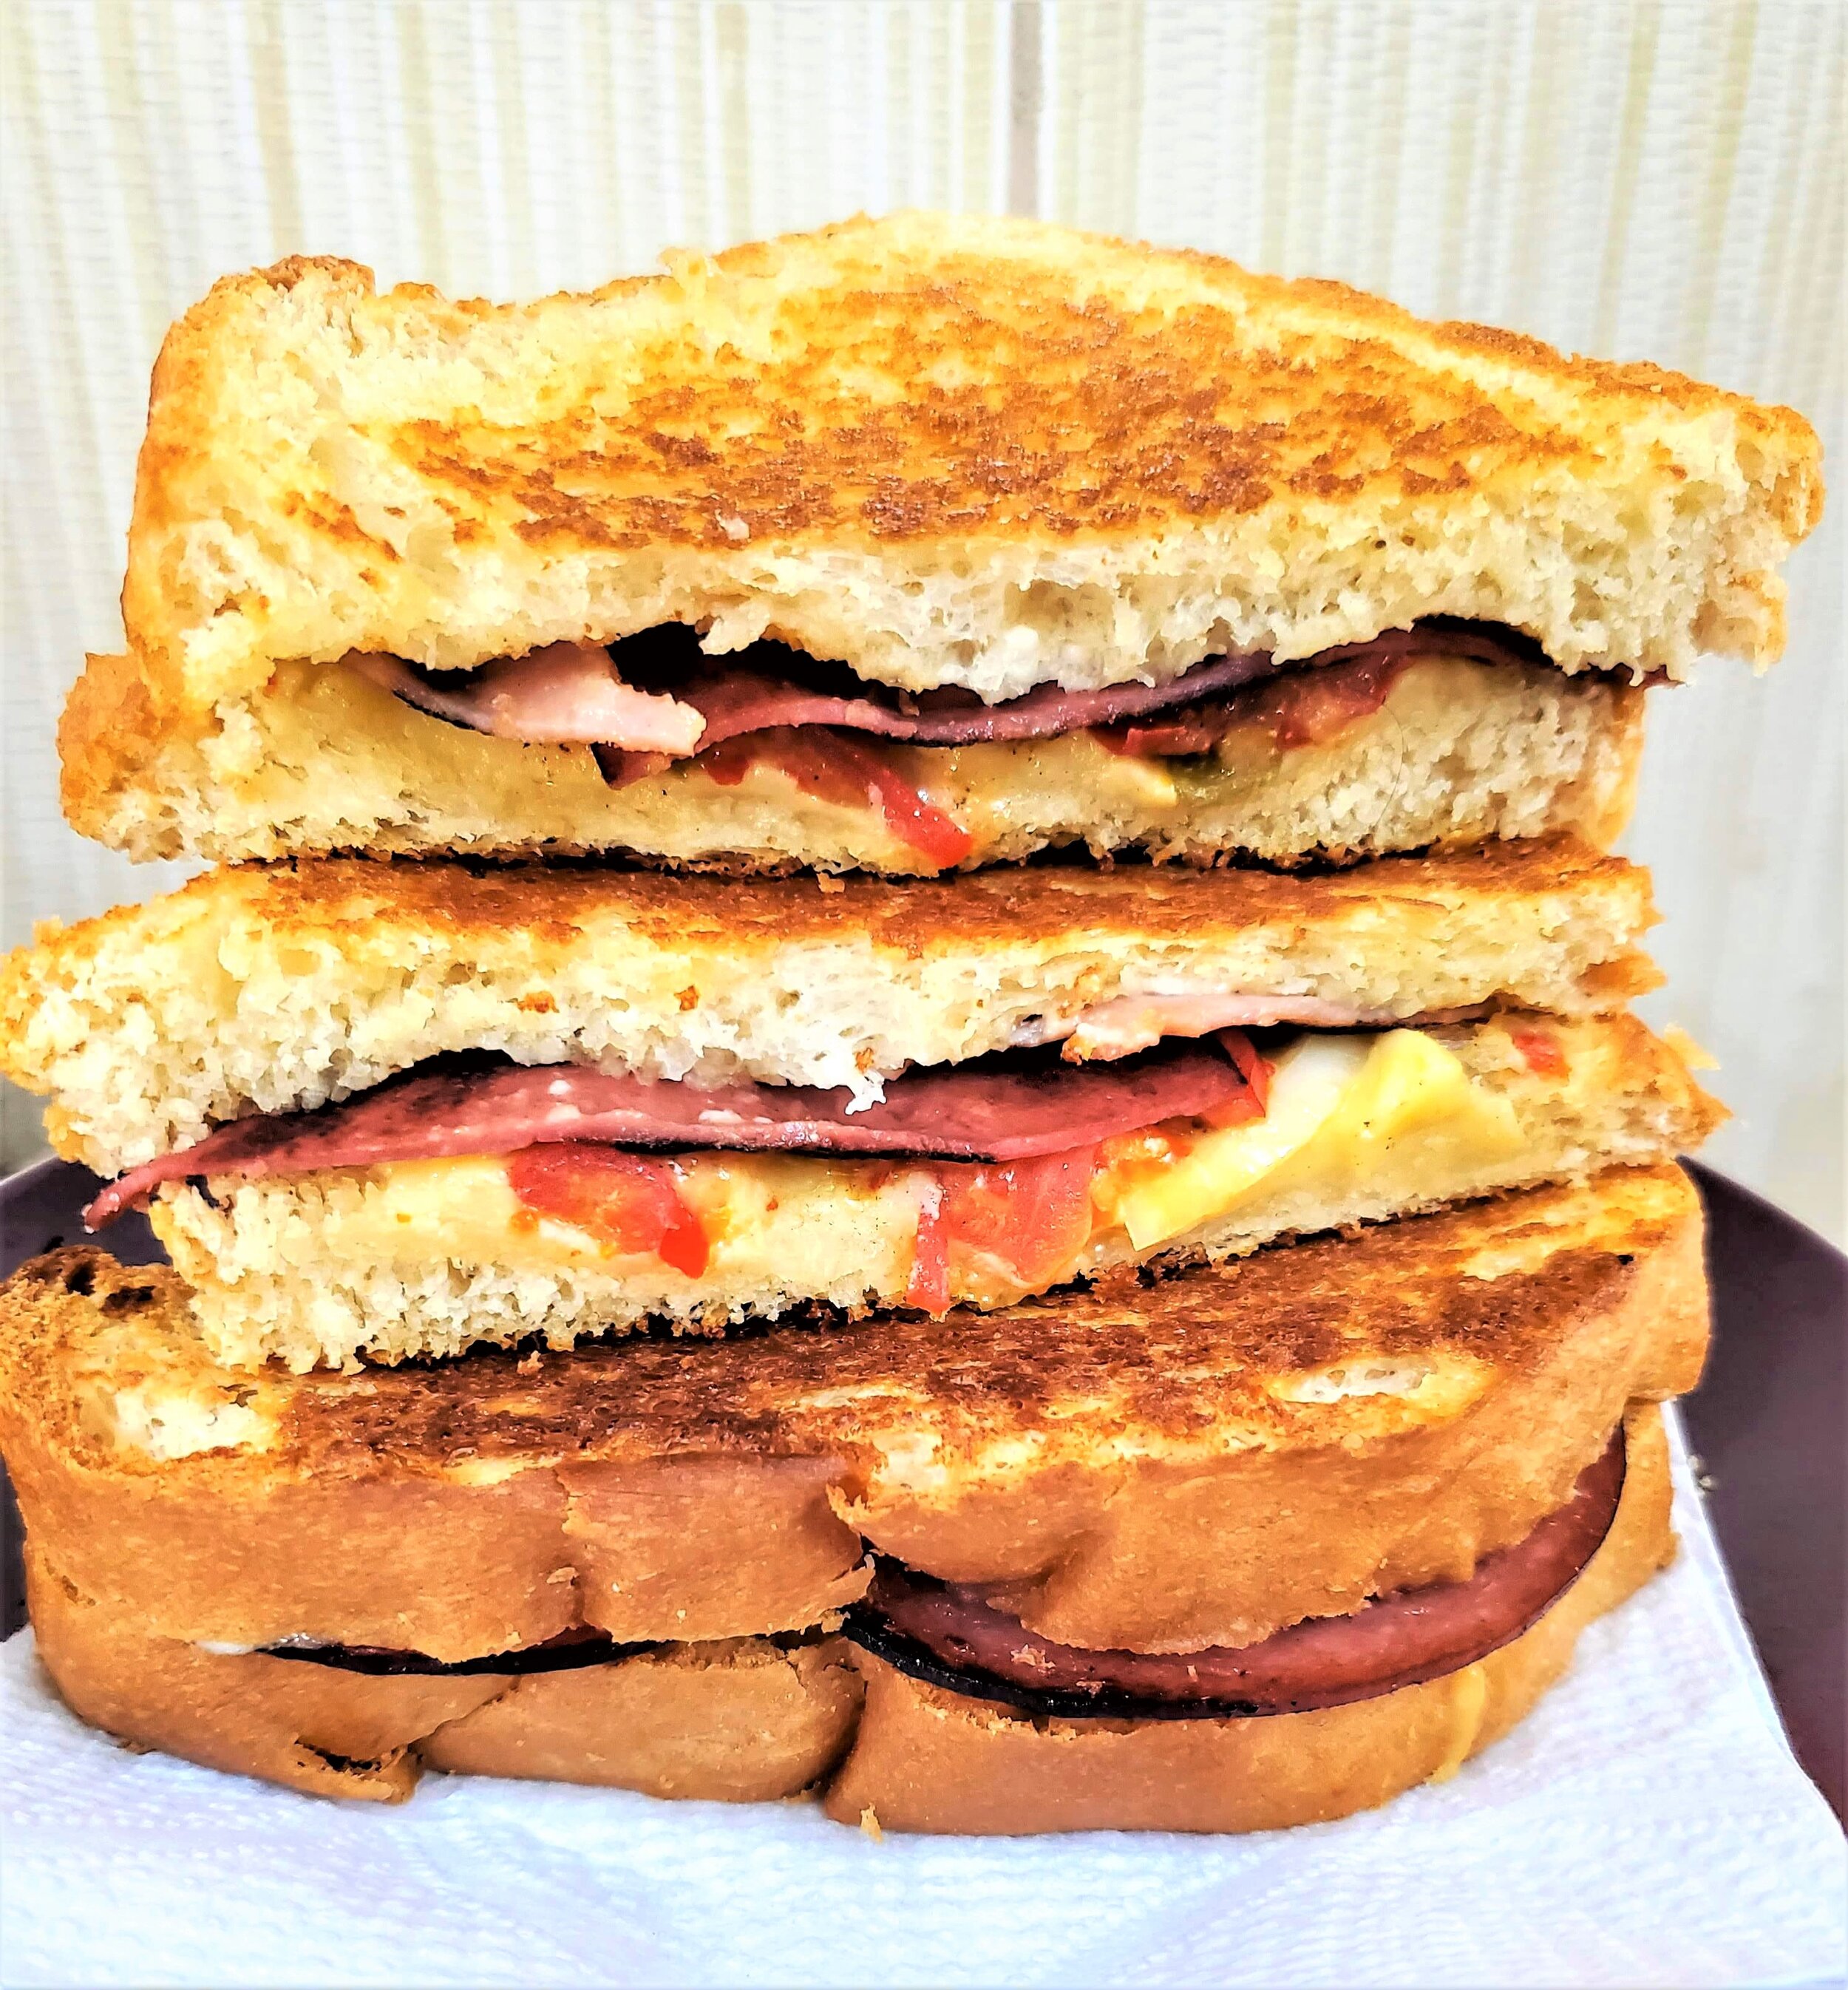 One of my favourite sandwiches! Grilled cheese with fried sausages, tomatoes, onions, pepper sauce and honey mustard!